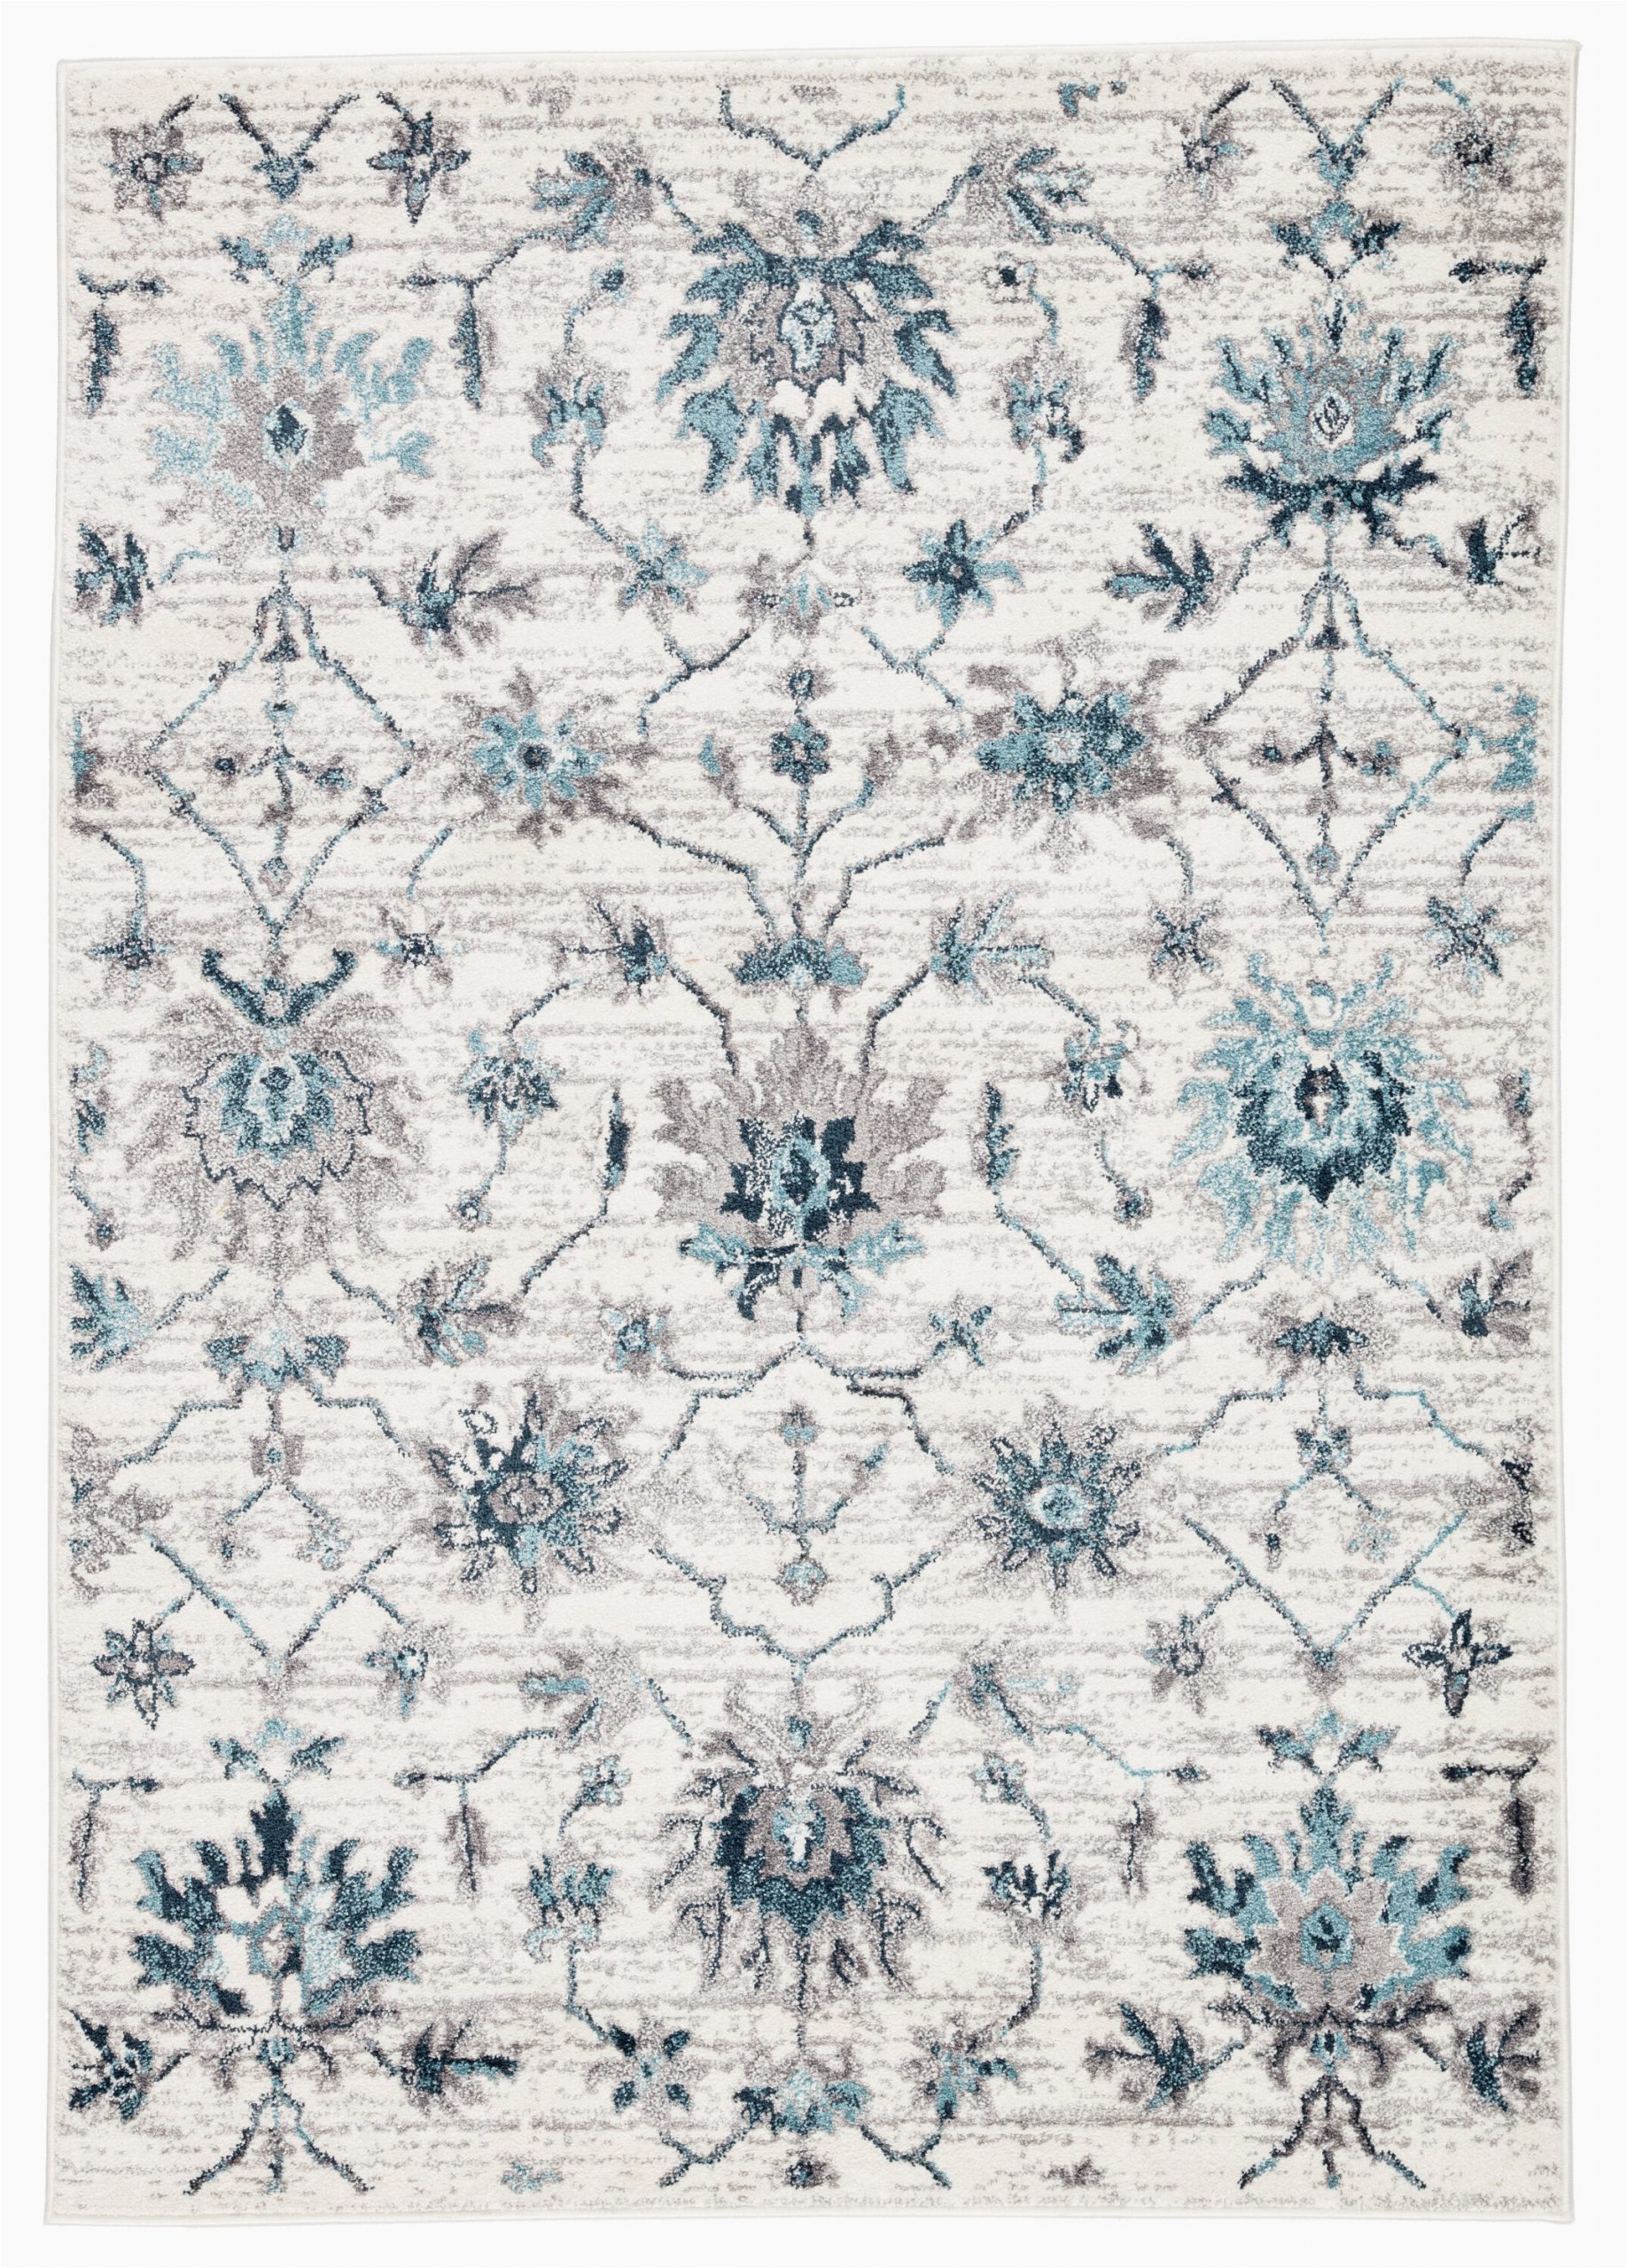 Grey White and Teal area Rug Garber Medallion White Teal area Rug